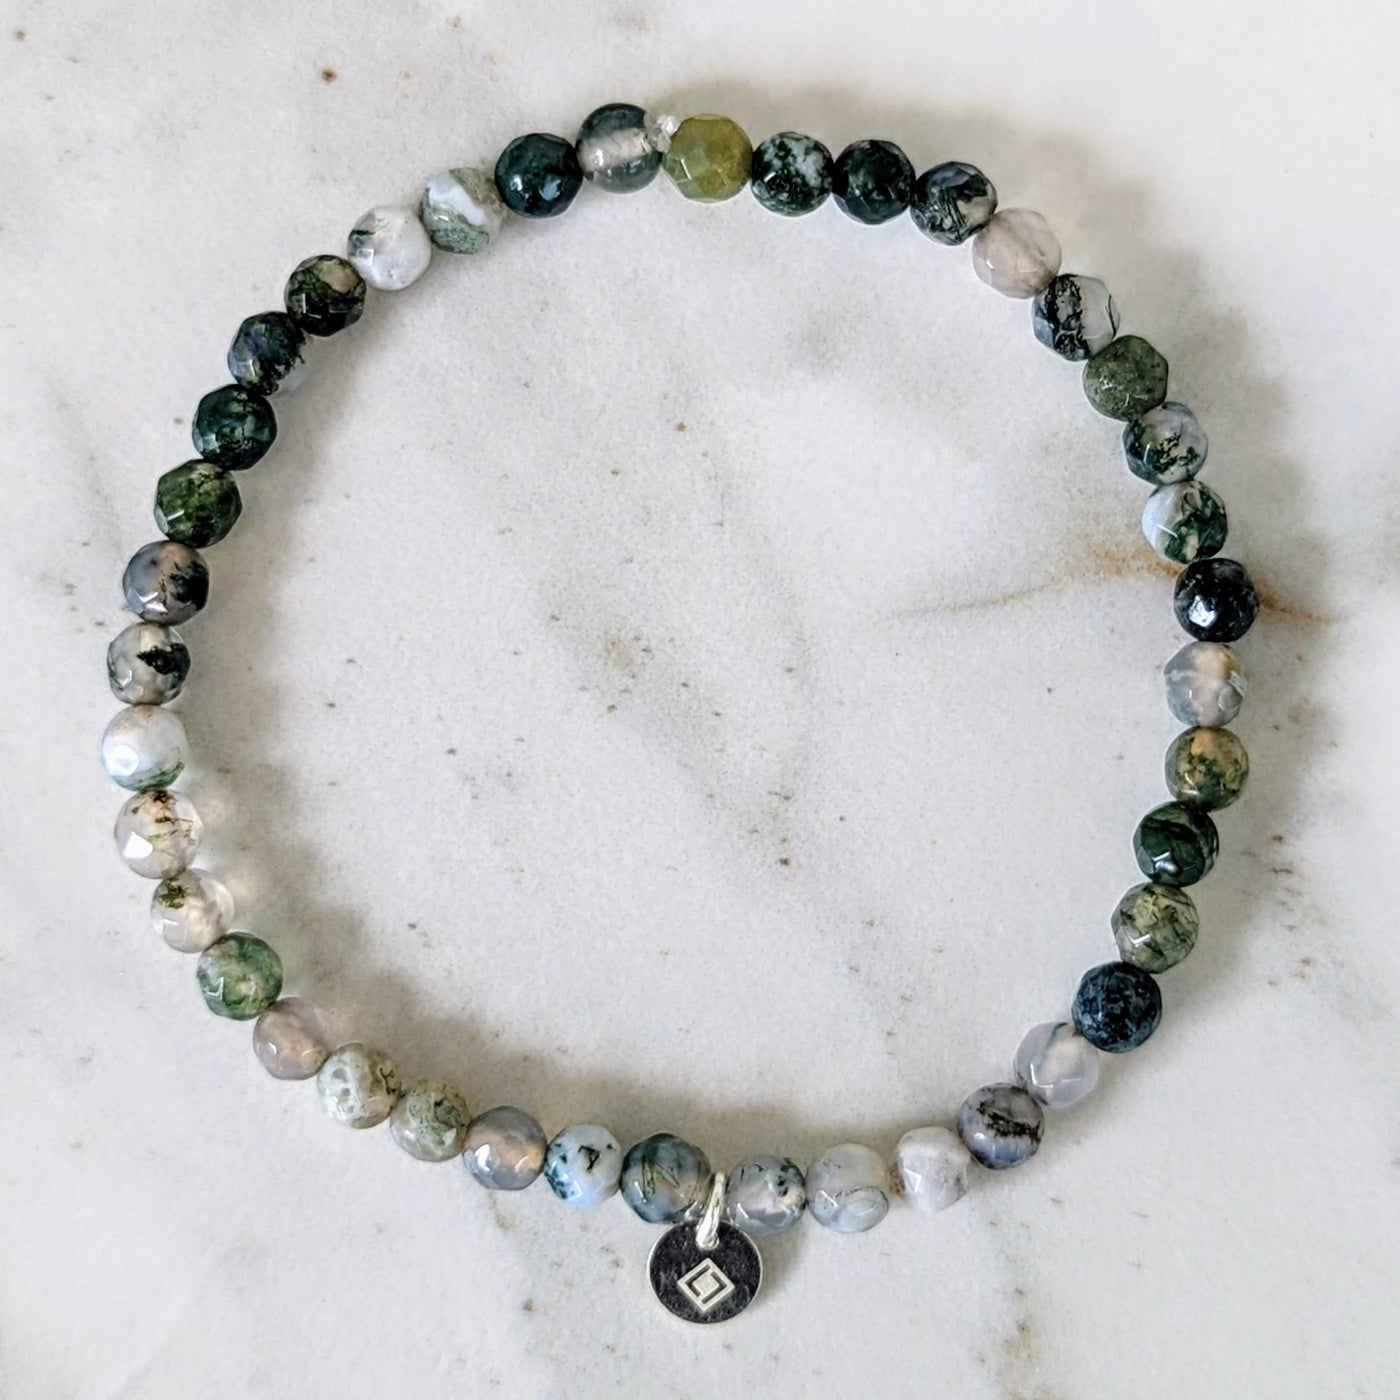 Moss agate 4mm faceted gemstone bracelet with sterling silver circular disc